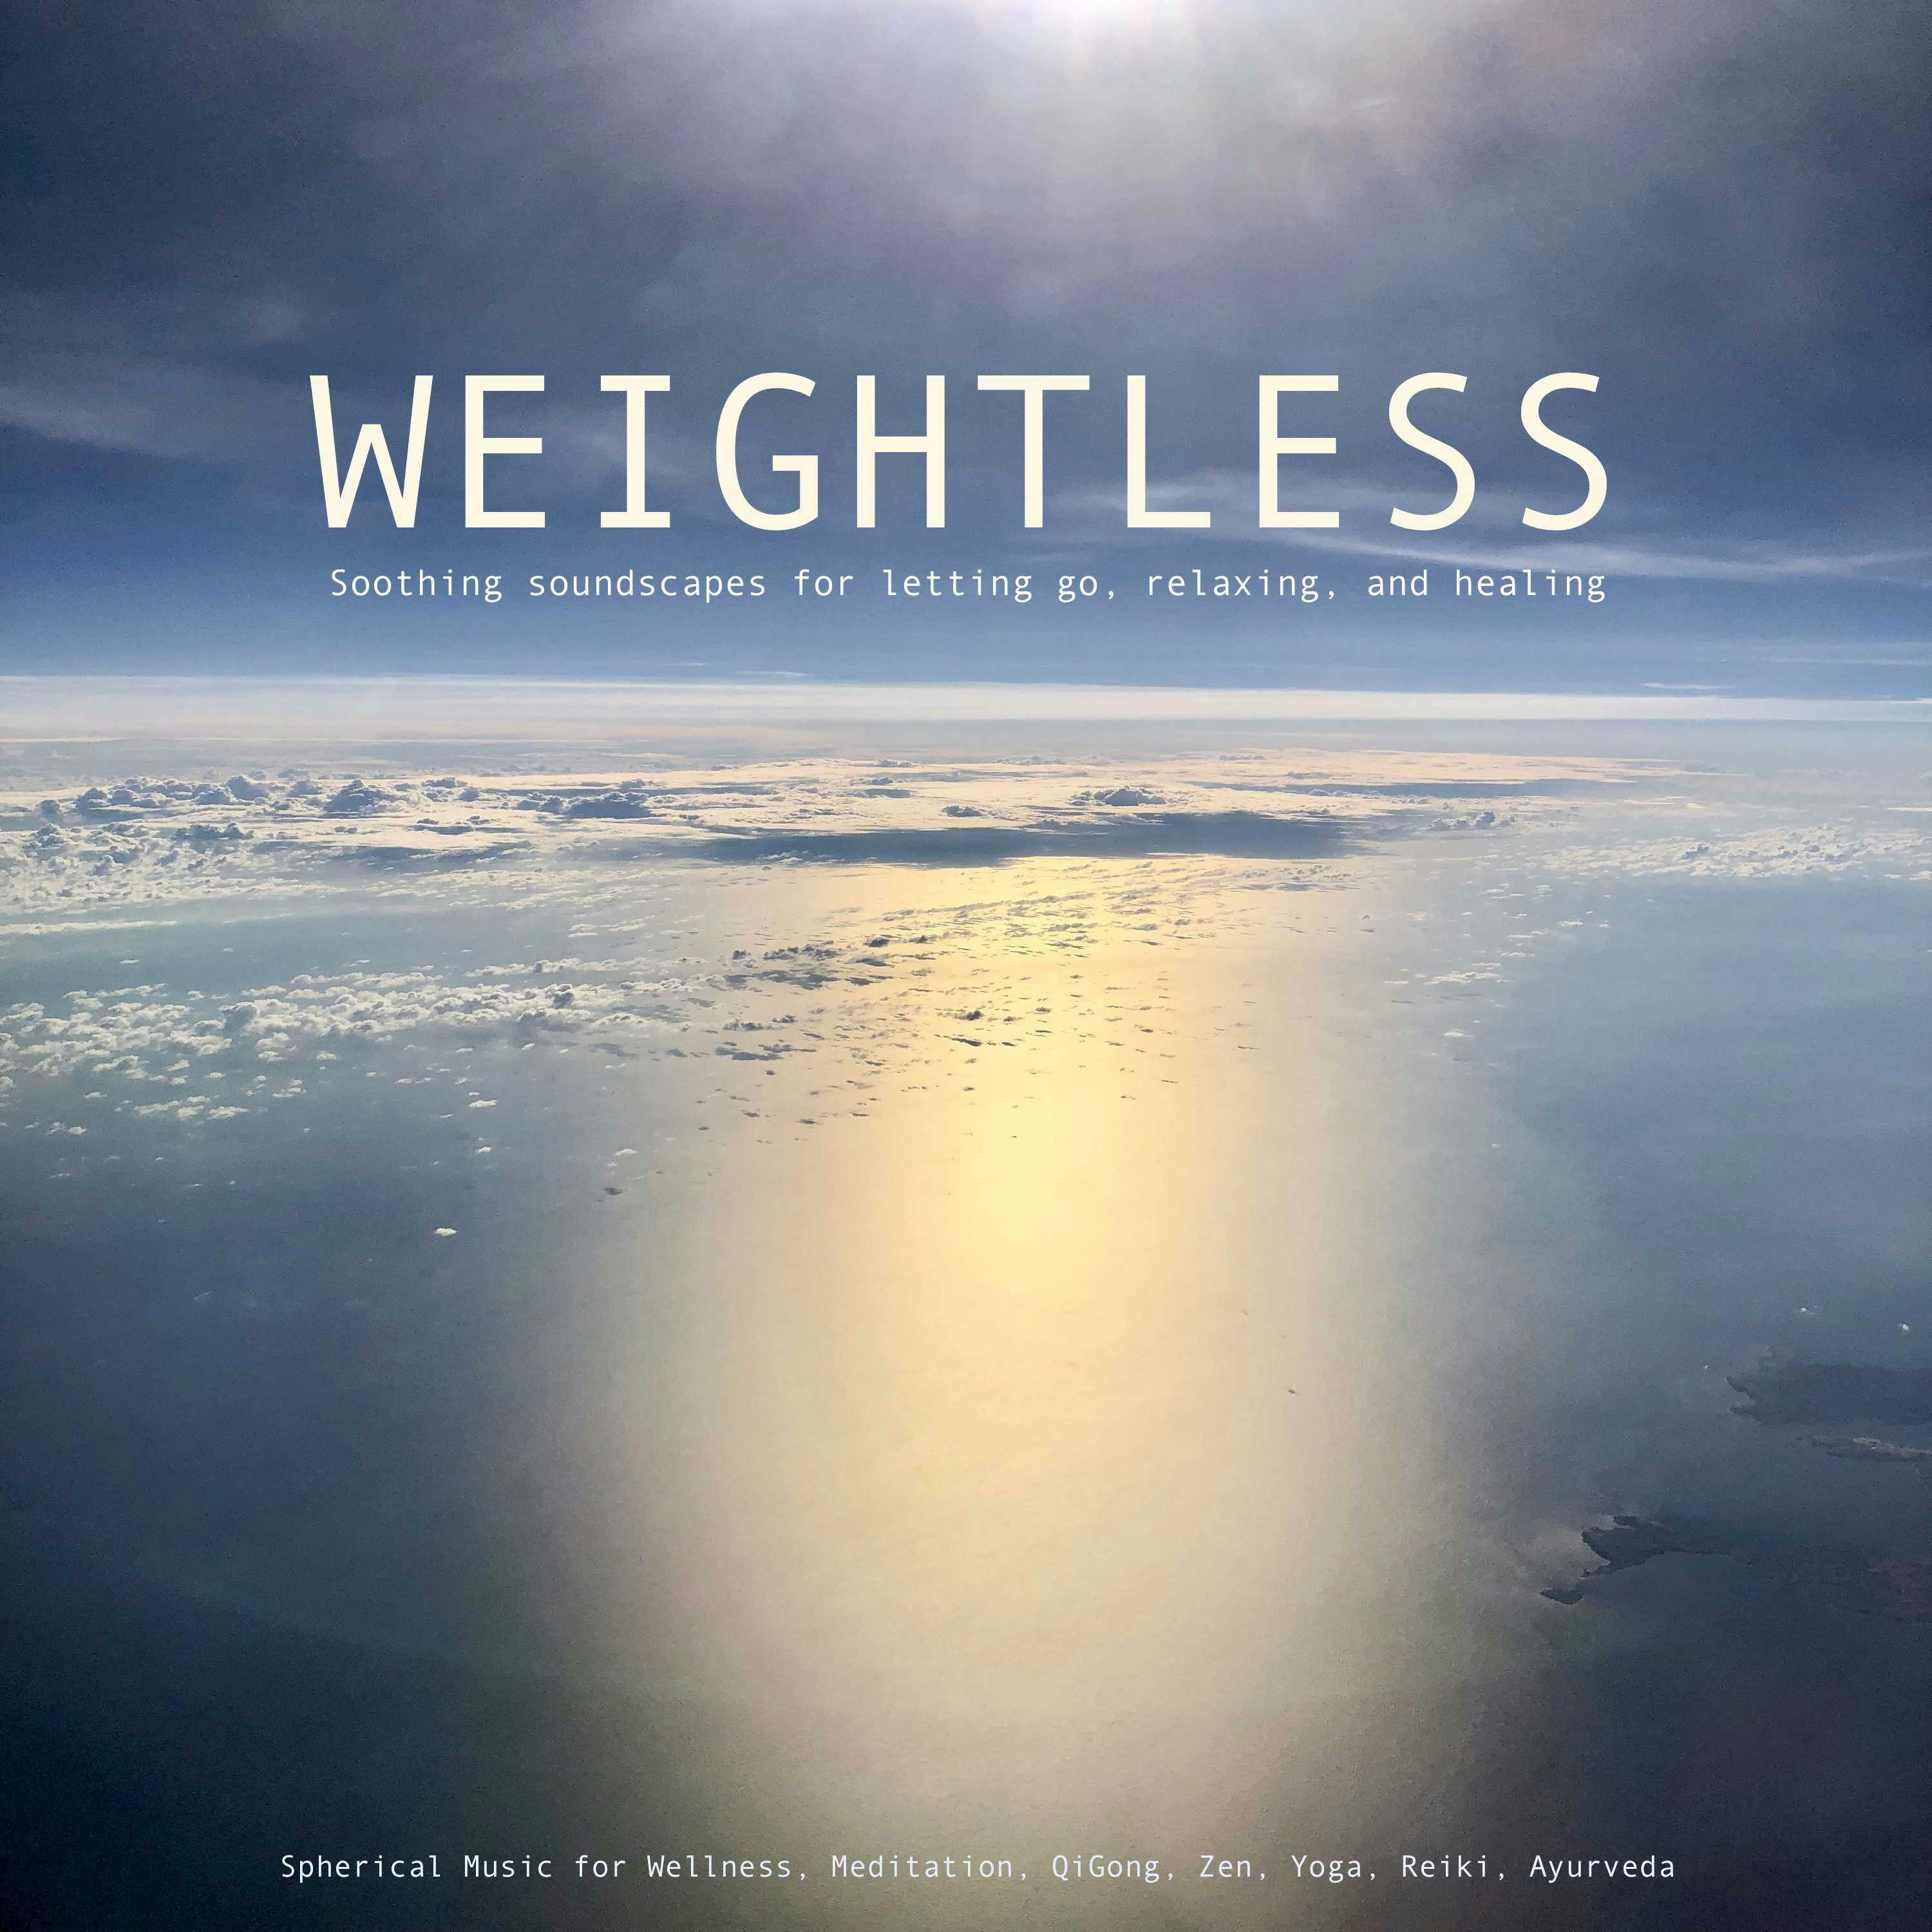 Weightless: Soothing soundscapes for letting go, relaxing, healing: Spherical Music for Wellness, Meditation, QiGong, Zen, Yoga, Reiki, Ayurveda - undefined